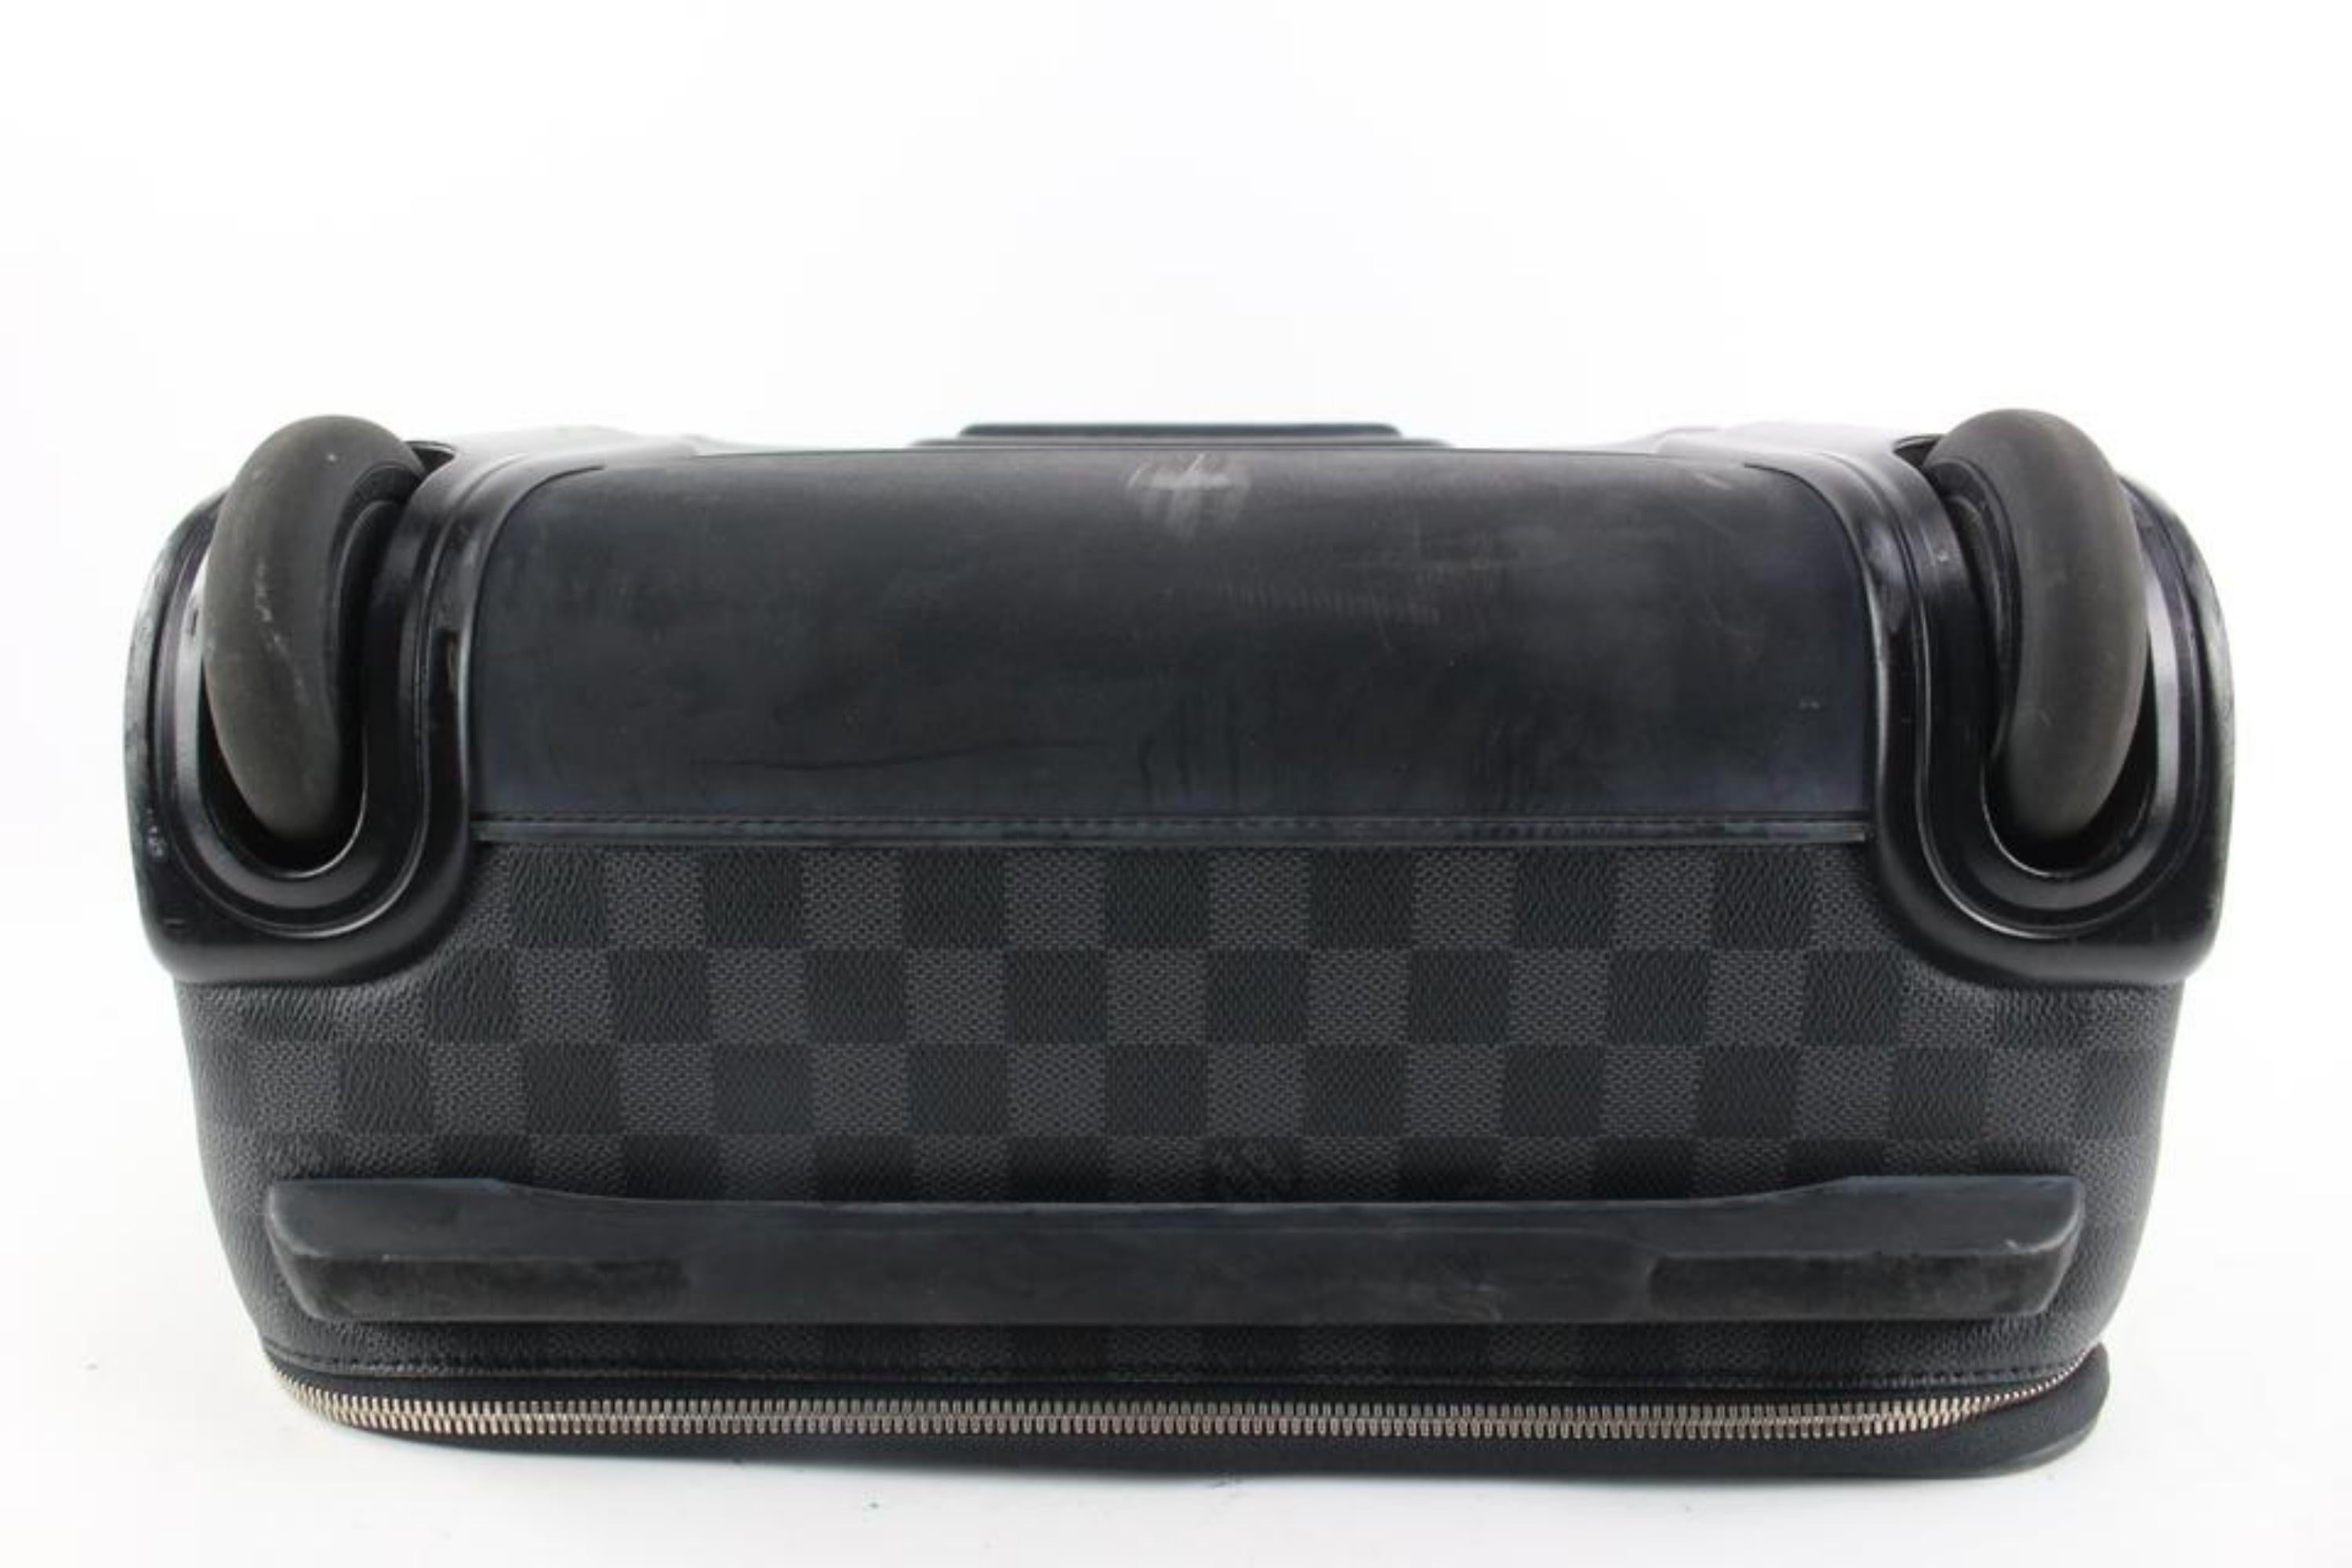 Louis Vuitton Damier Graphite Pegase 45 Rolling Luggage Trolley Suitcase 1223lv2 For Sale 4